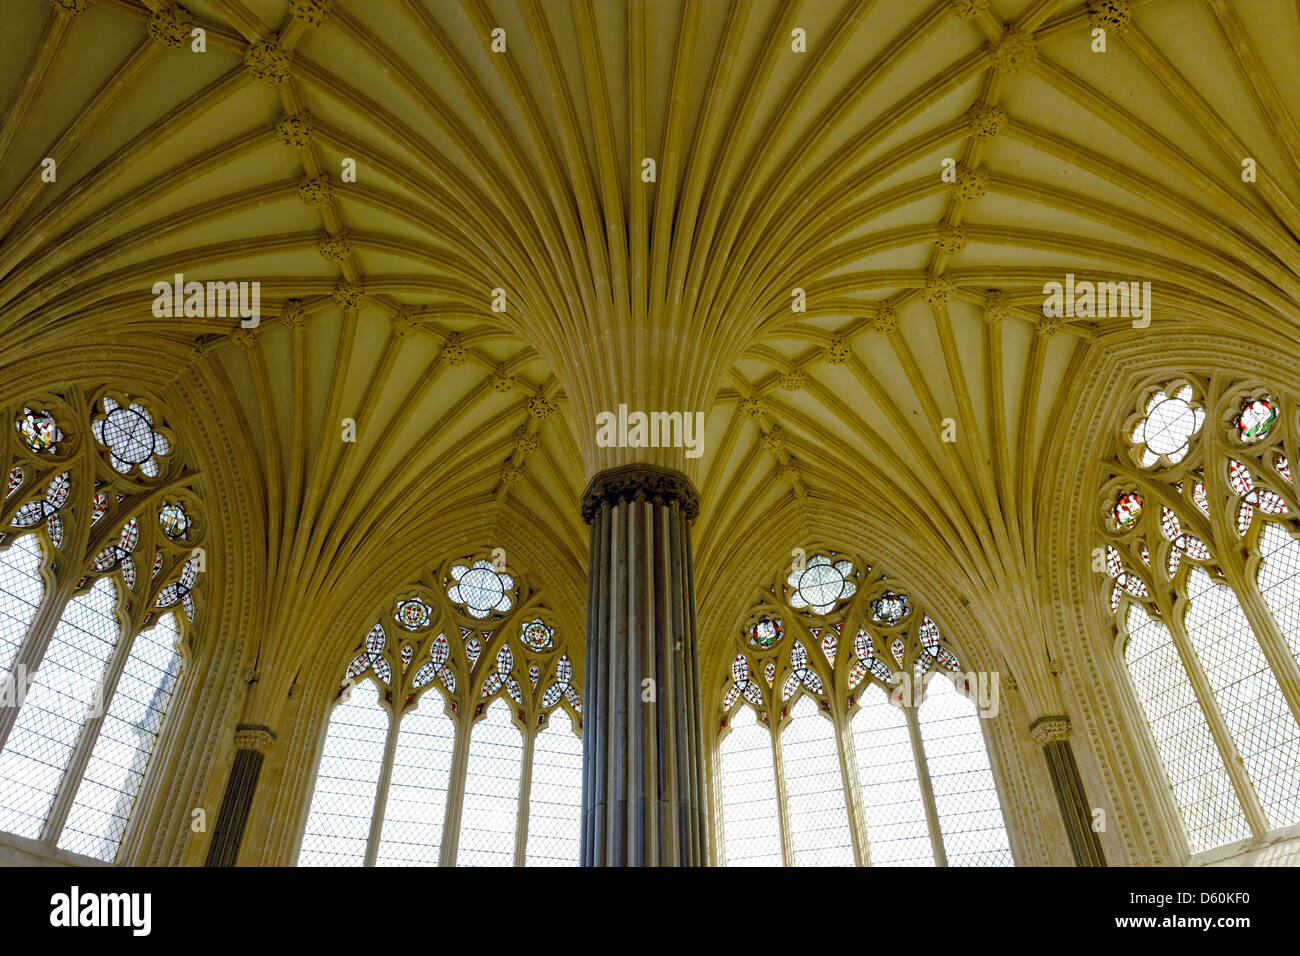 Vaulted ceiling in the Chapter House, Wells Cathedral, Somerset, England Stock Photo